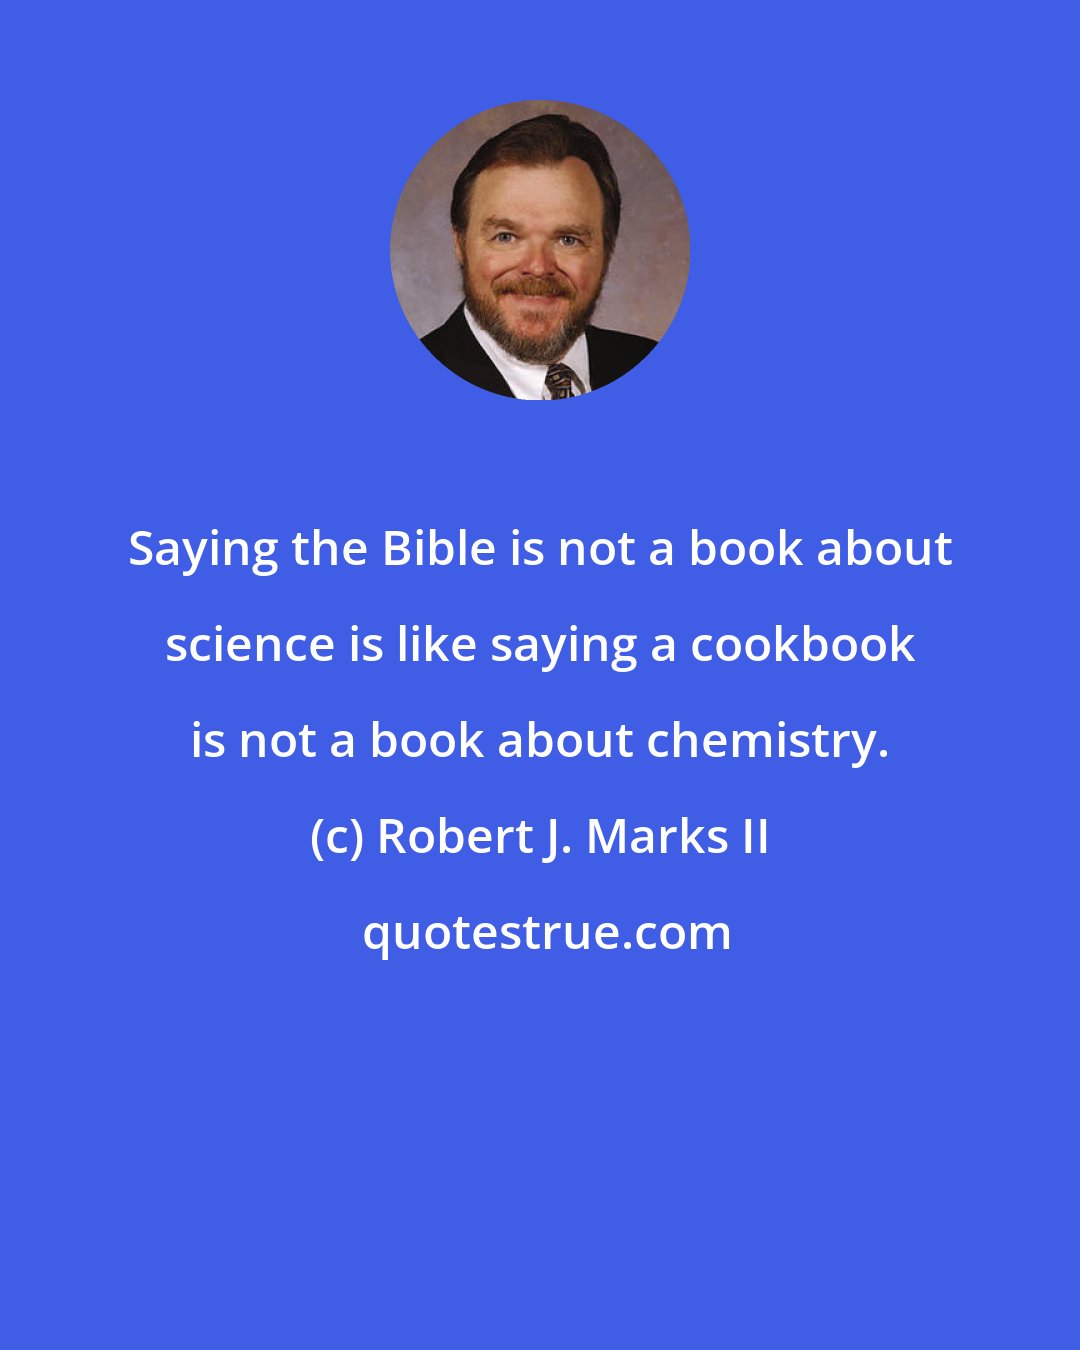 Robert J. Marks II: Saying the Bible is not a book about science is like saying a cookbook is not a book about chemistry.